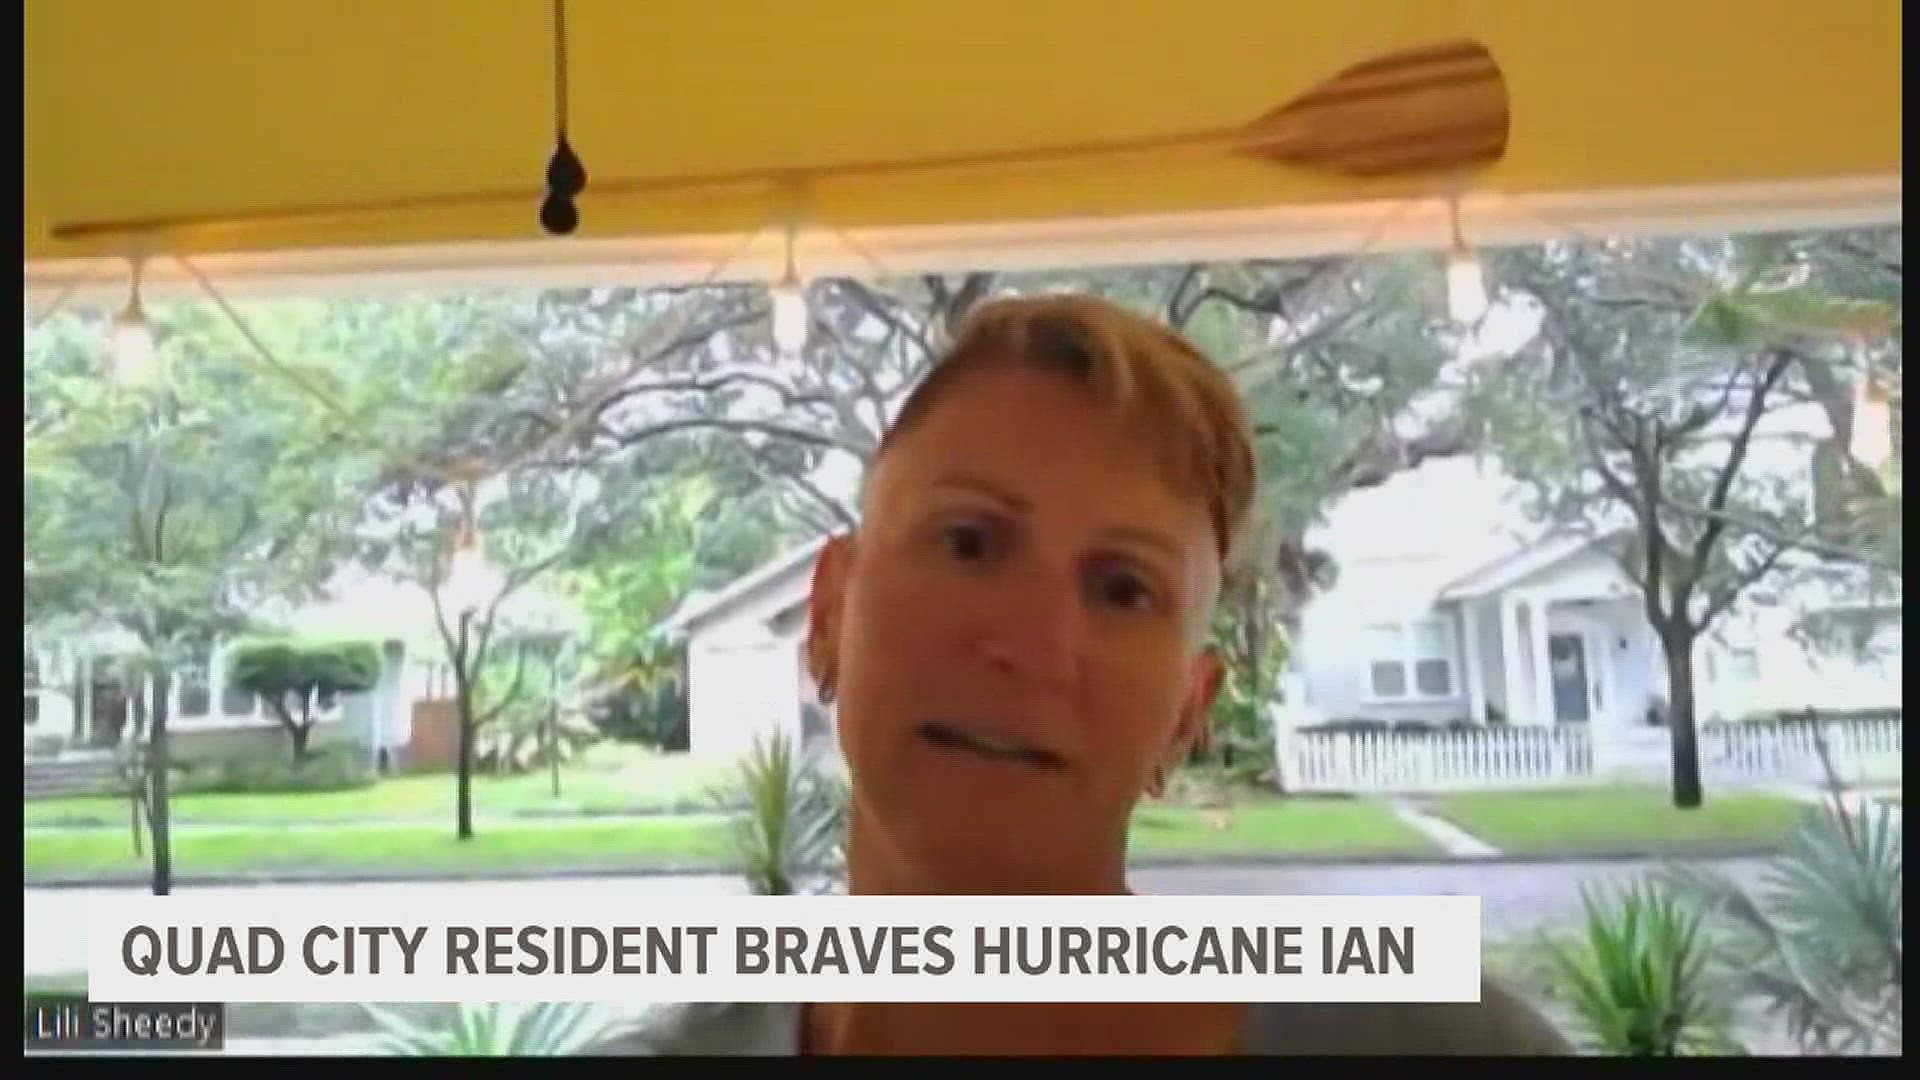 Lili Sheedy, a former Davenport resident, plans to stay at her home in St. Petersburg with her fiance as Hurricane Ian touches down in Florida.